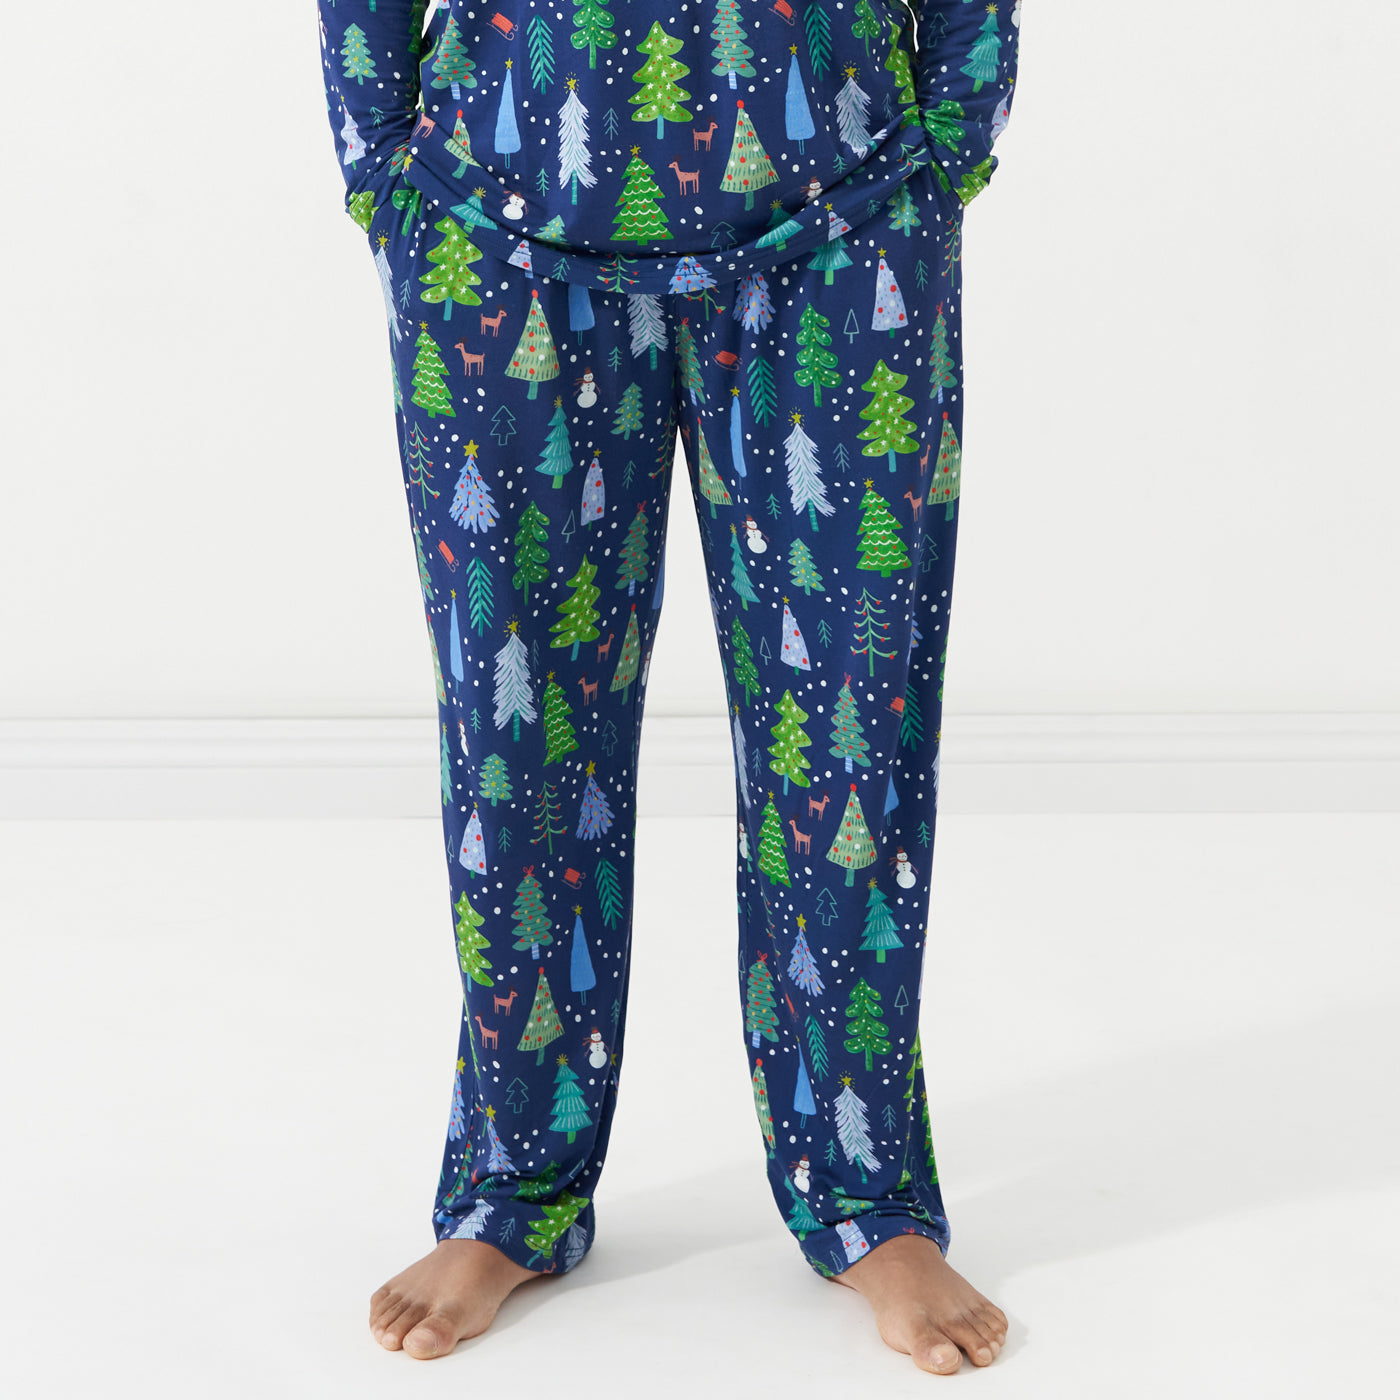 Close up image of man posing with his hands in his pockets wearing Blue Merry and Bright printed pajama bottoms